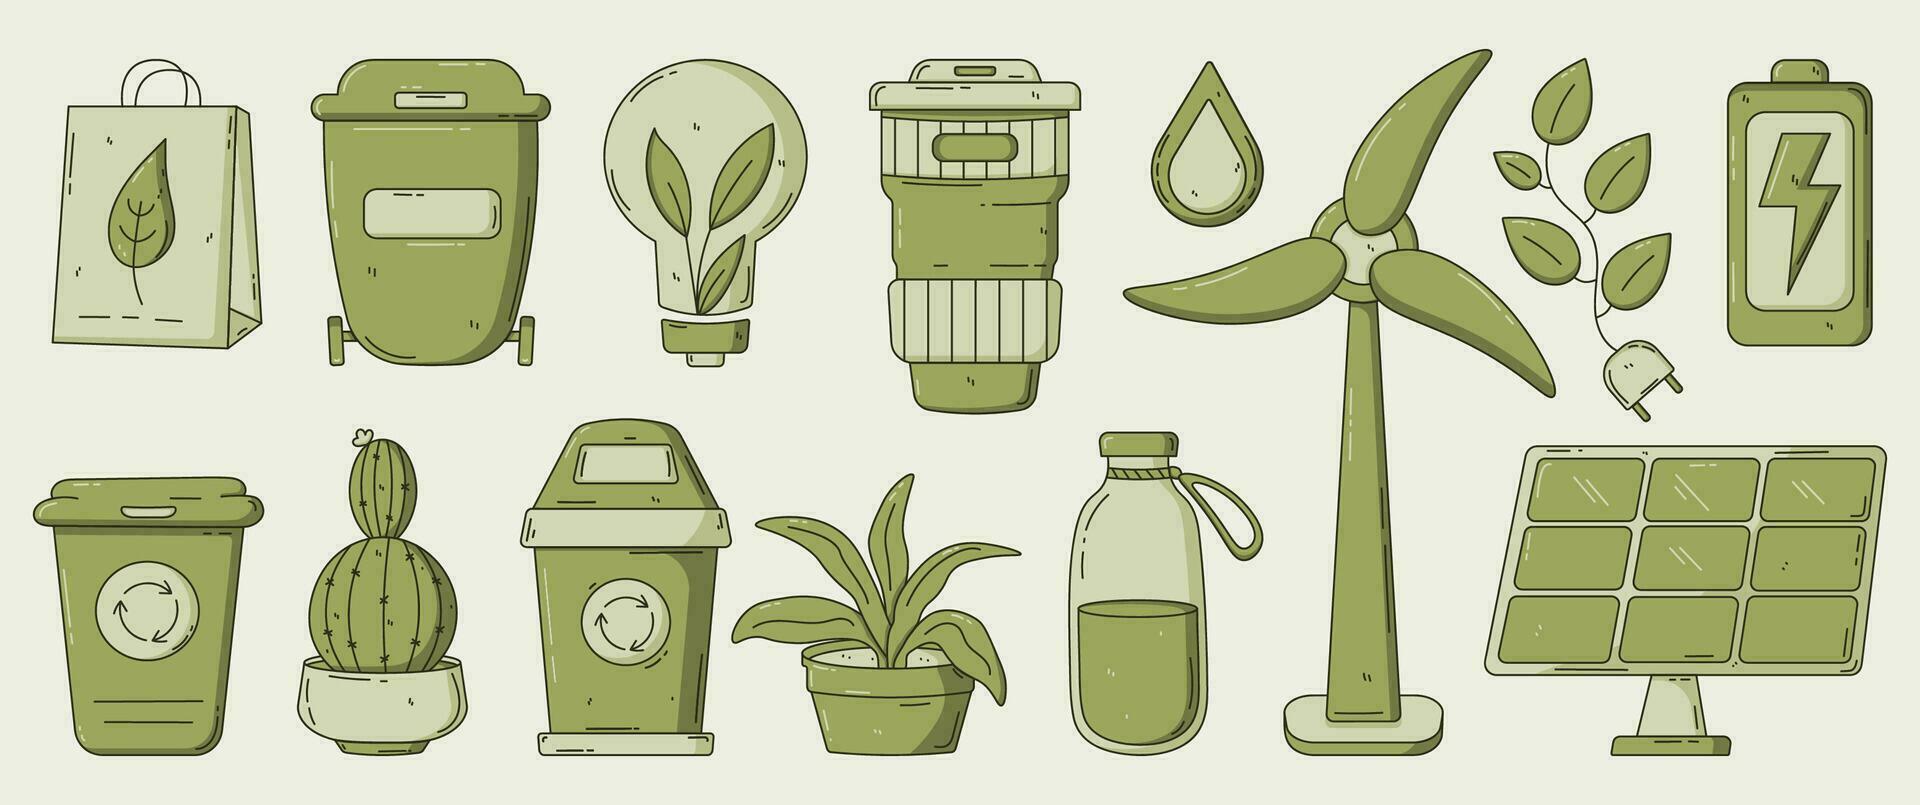 Set of objects on the topic of ecology. Eco lifestyle, zero waste, recycle, eco friendly. Reduce, reuse, refuse. Green sustainable habits concept. Cute cartoon style. Modern hand drawn vector. vector